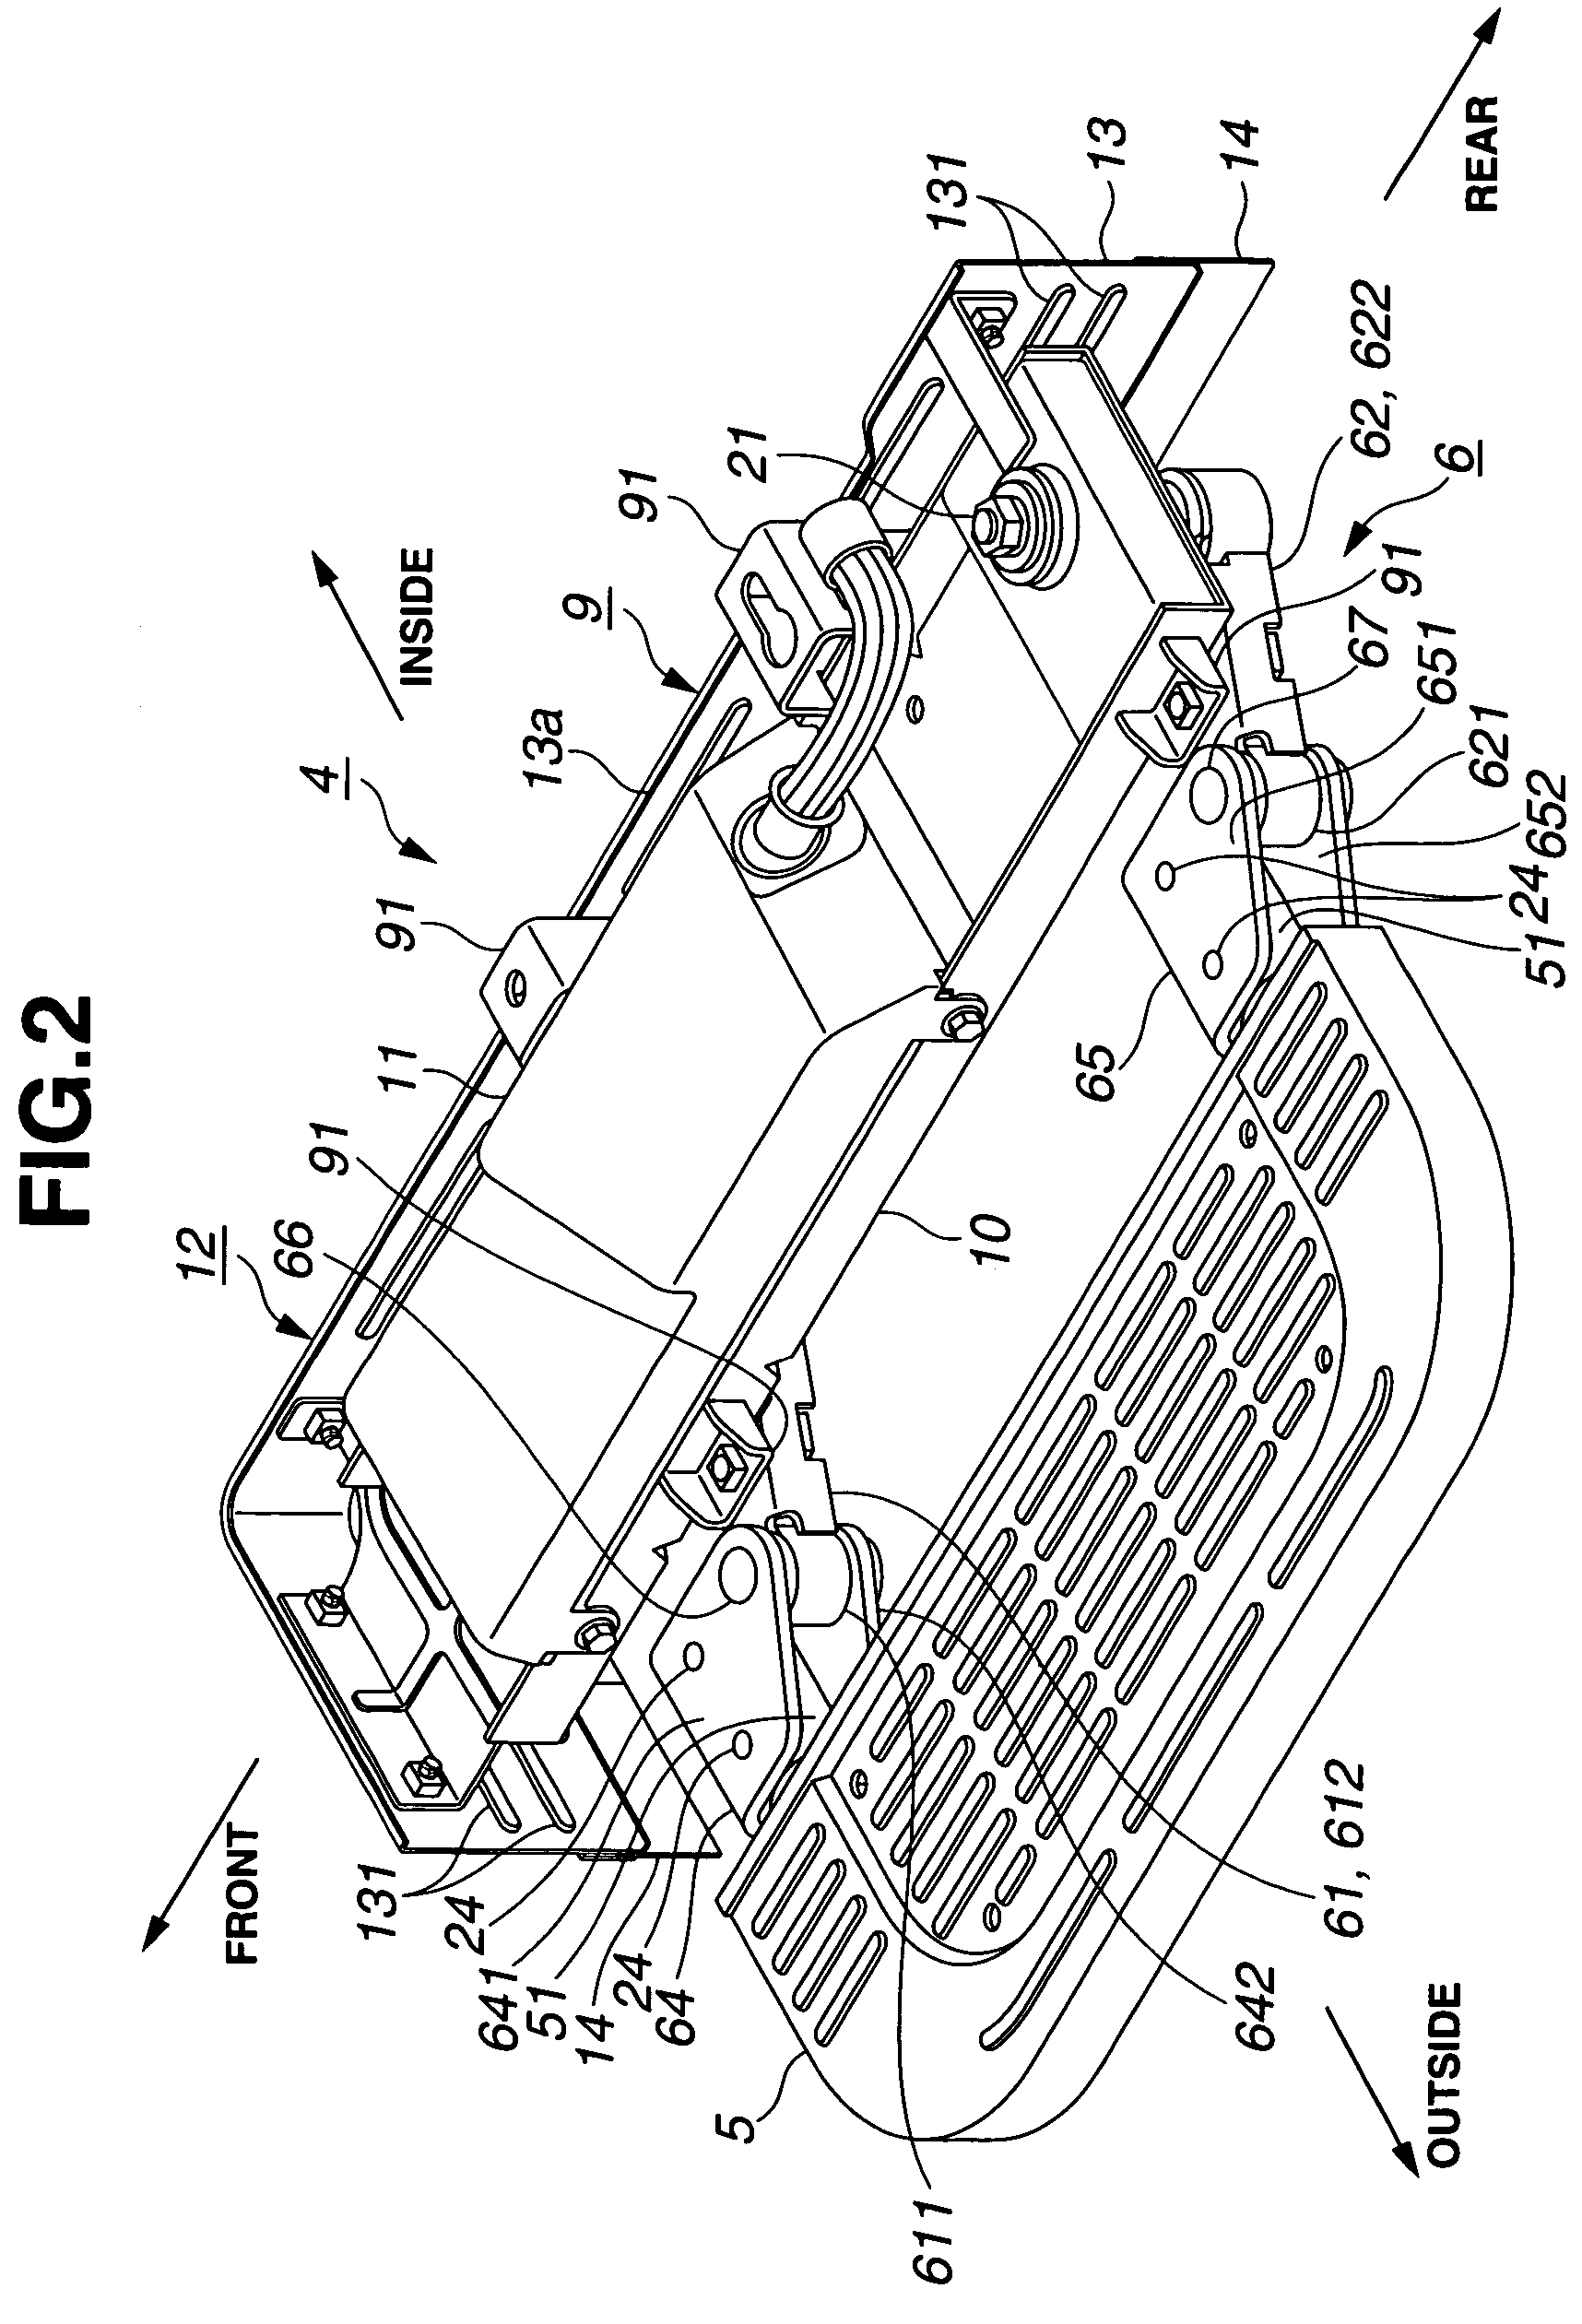 Powered step device of motor vehicle